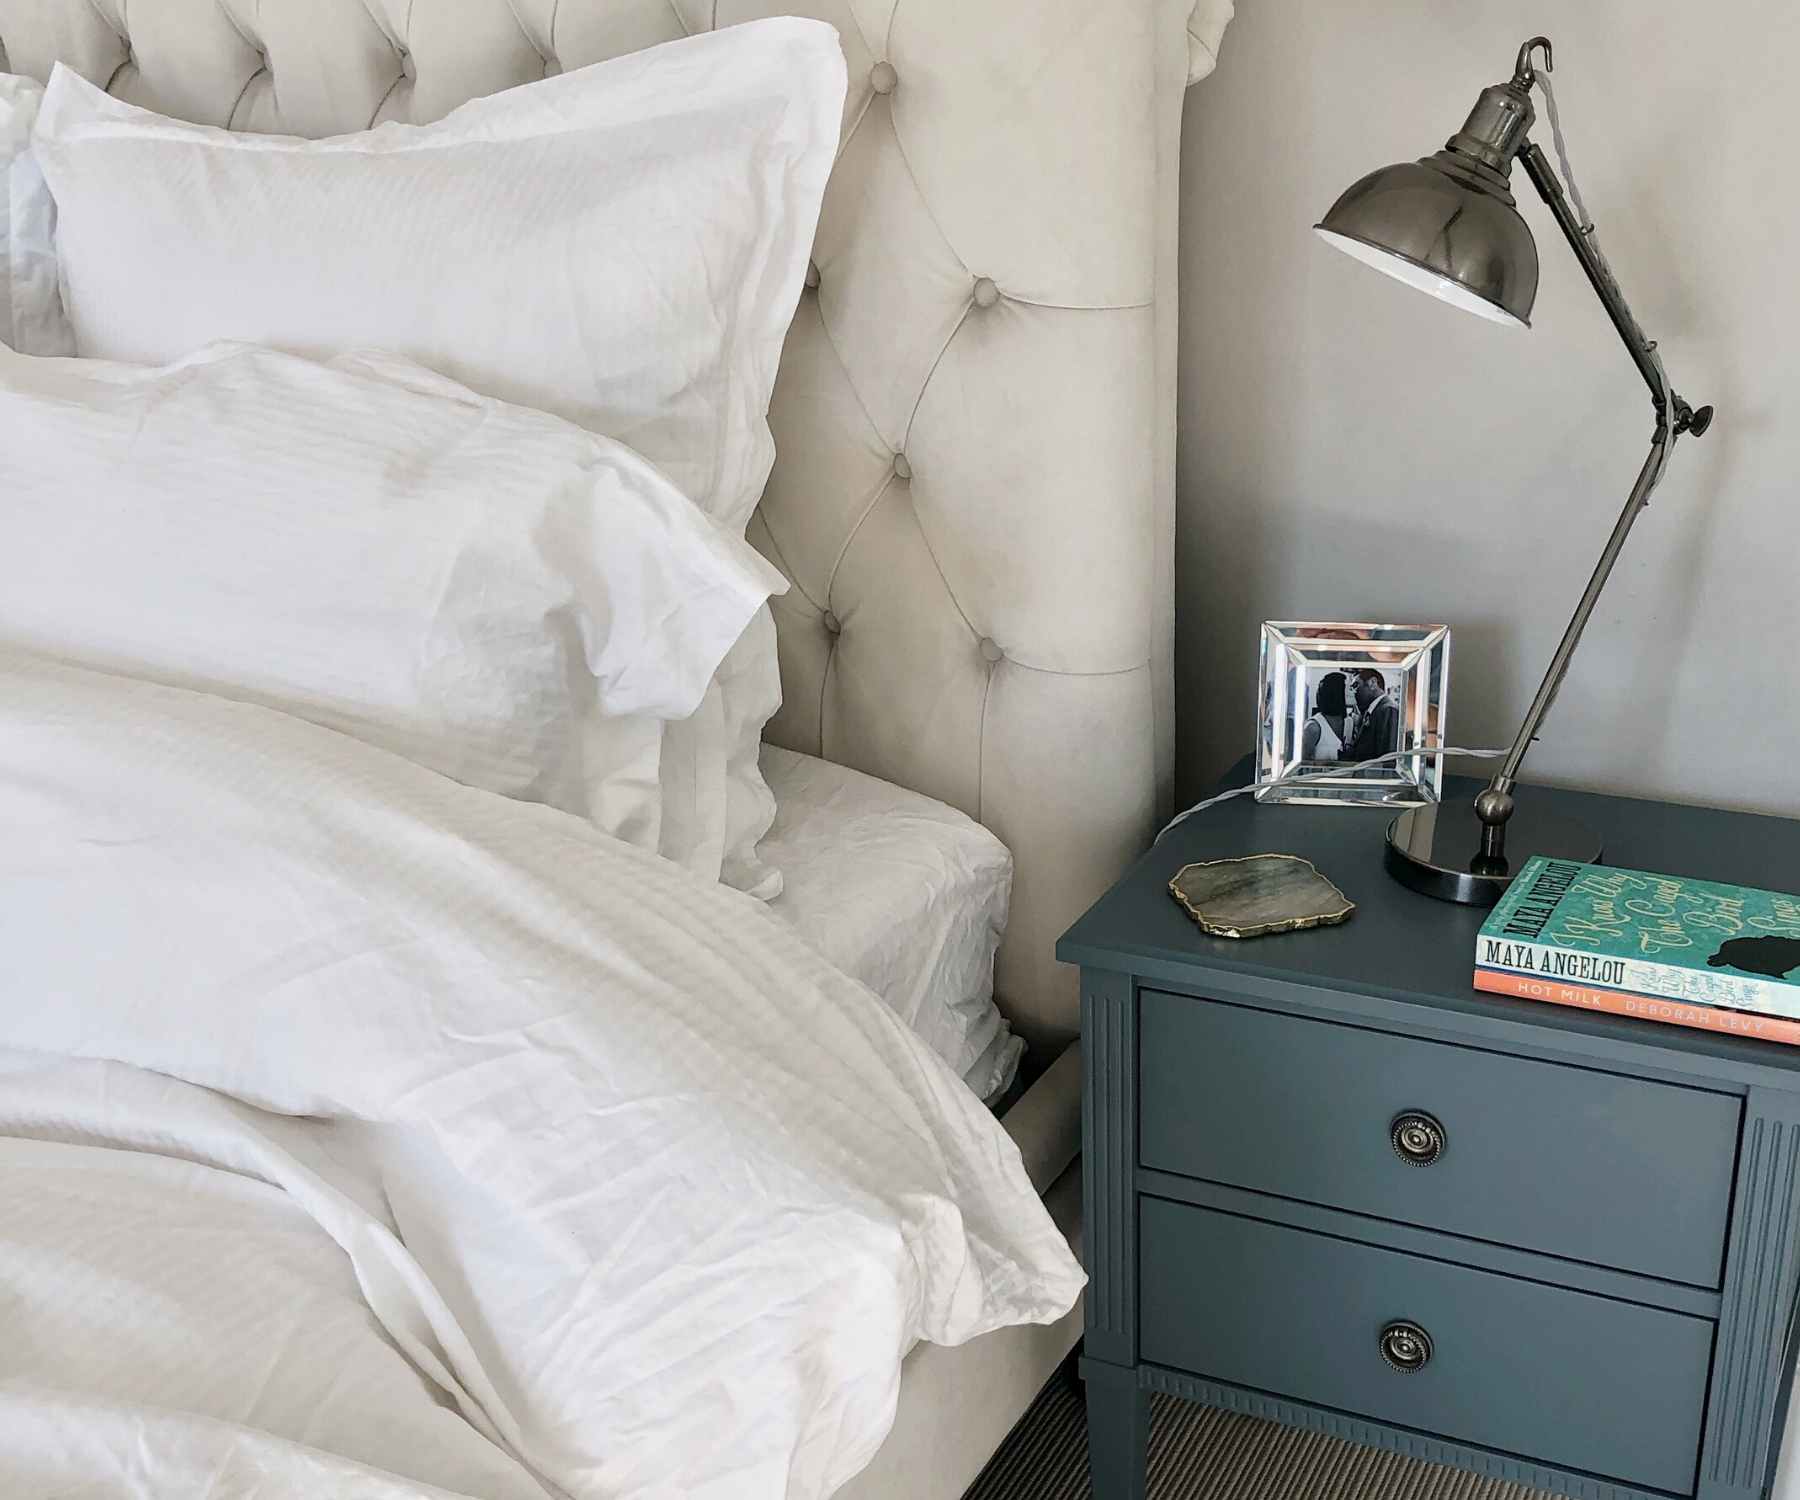 Blue bedside table with lamp next to white king size bed